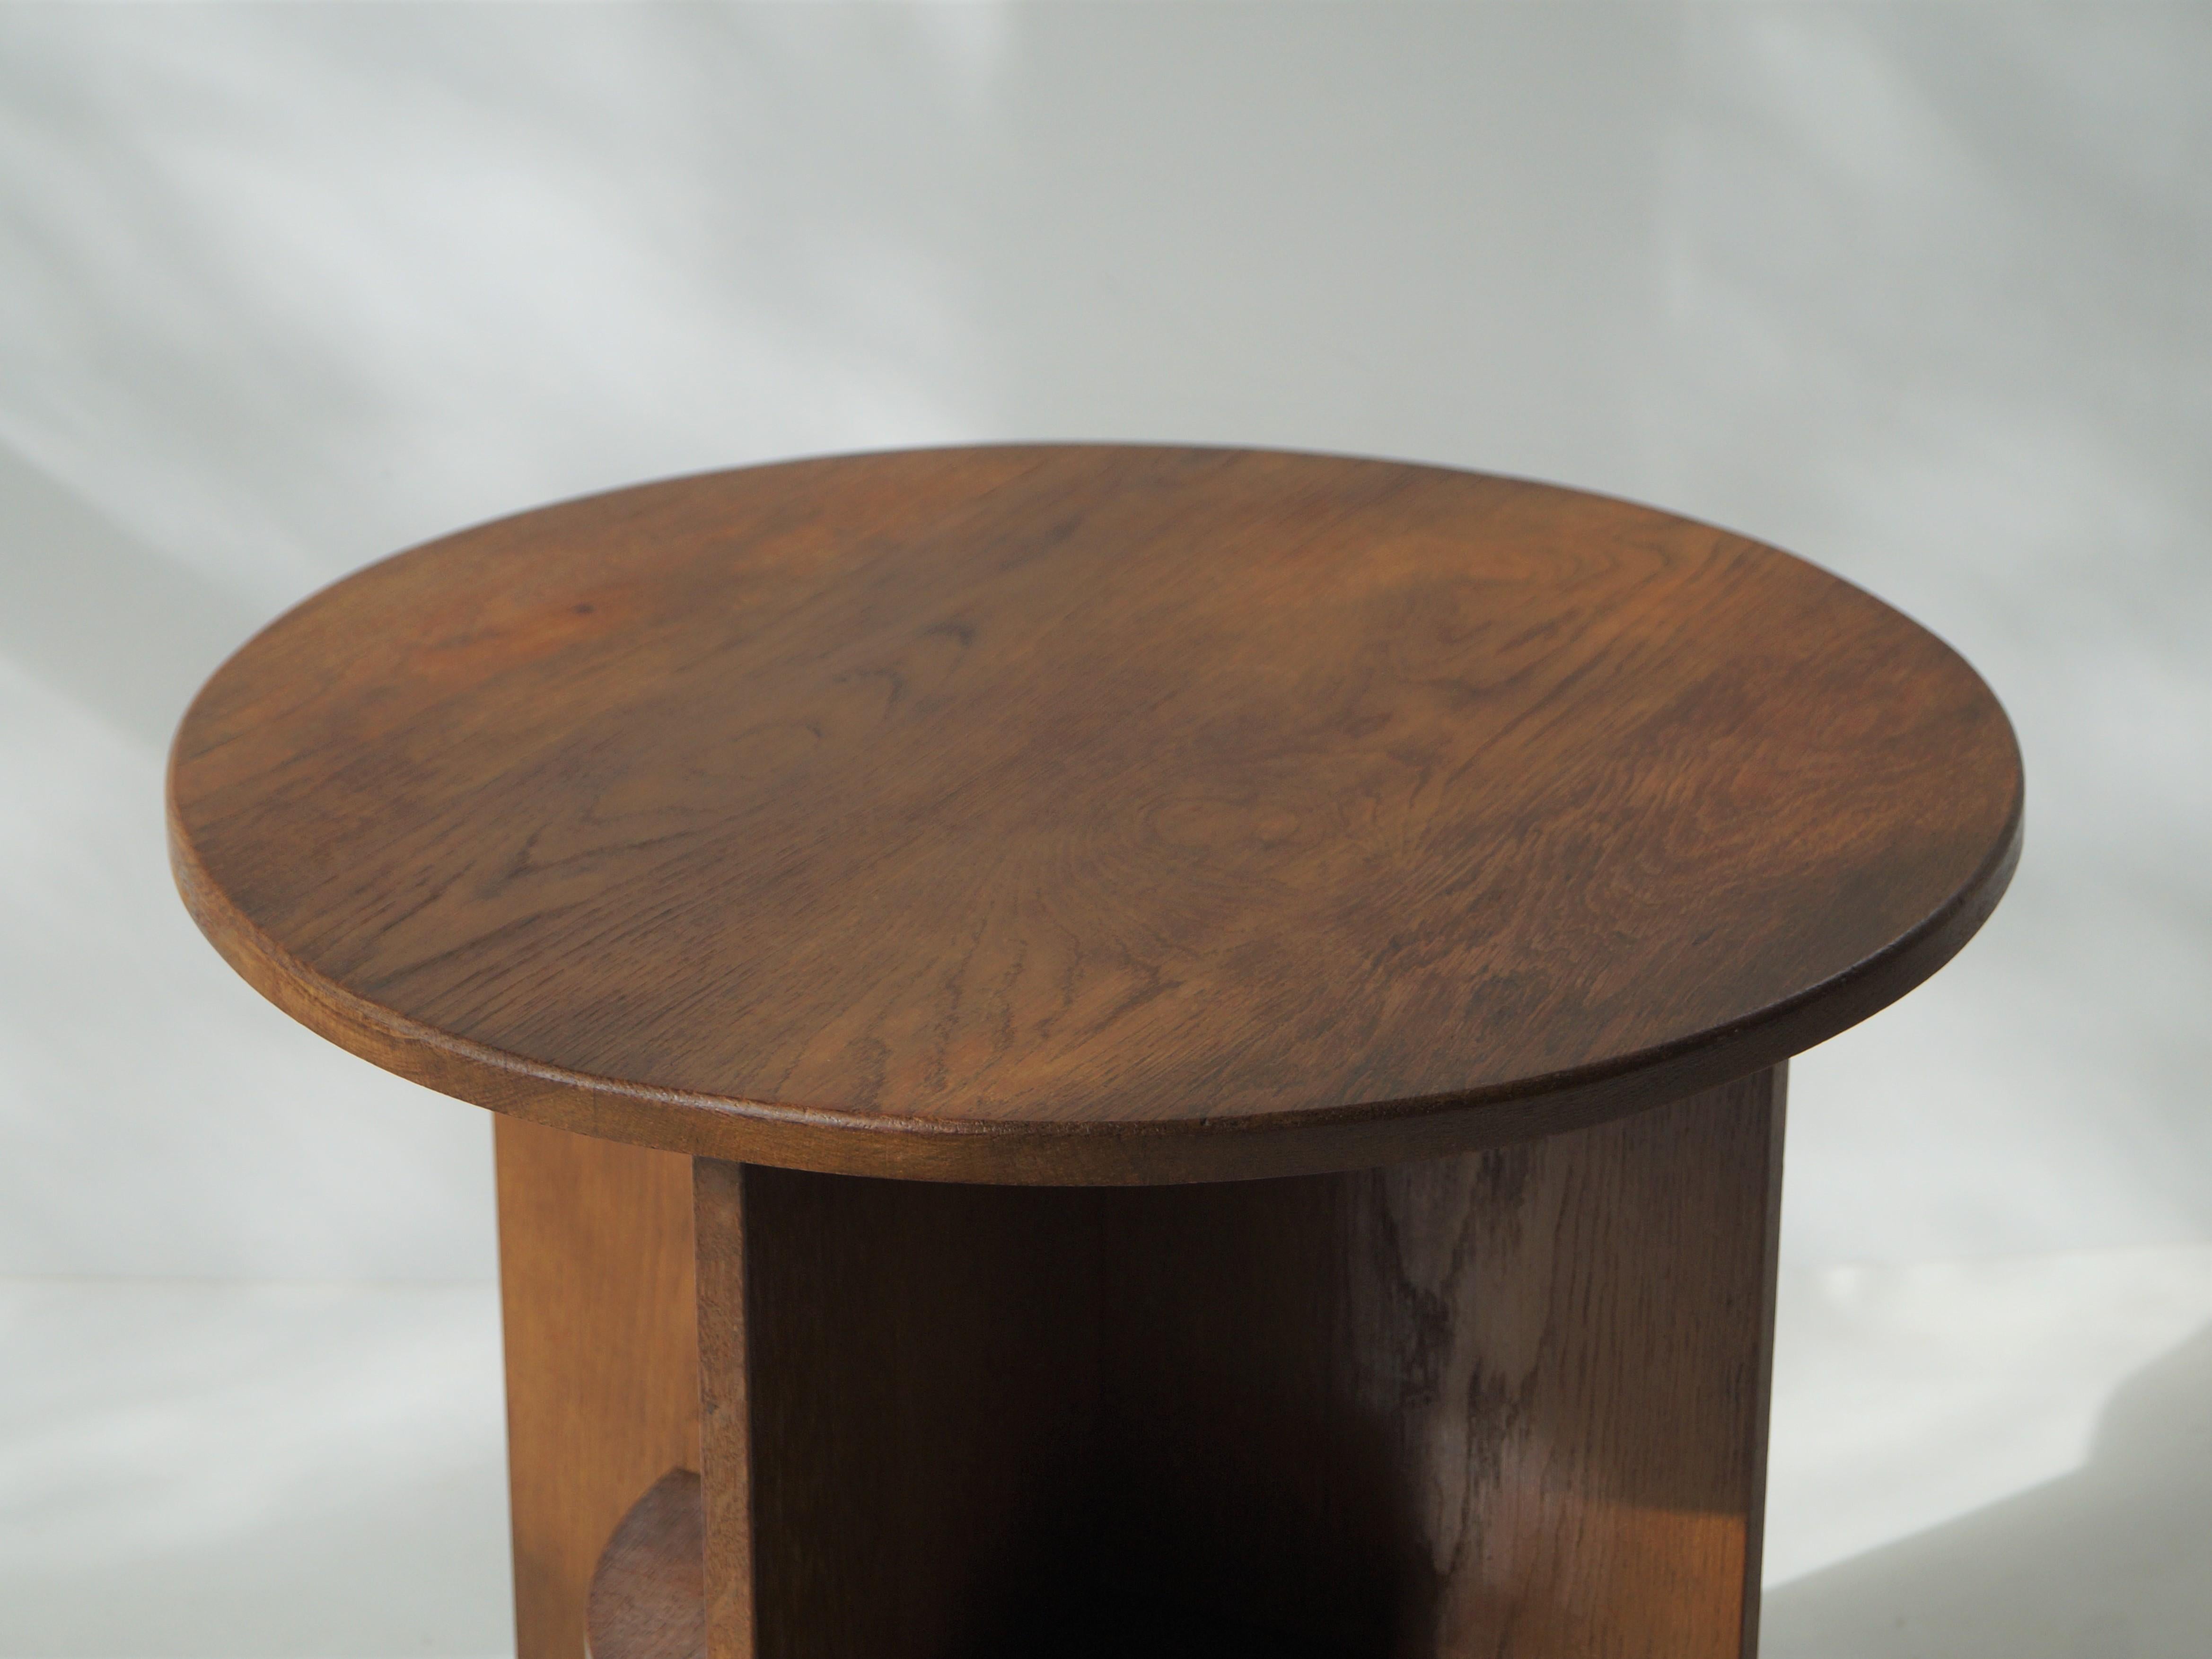 Dutch Art Deco (Haagse School) Occasional Table with Modernist Lines, 1920s 4